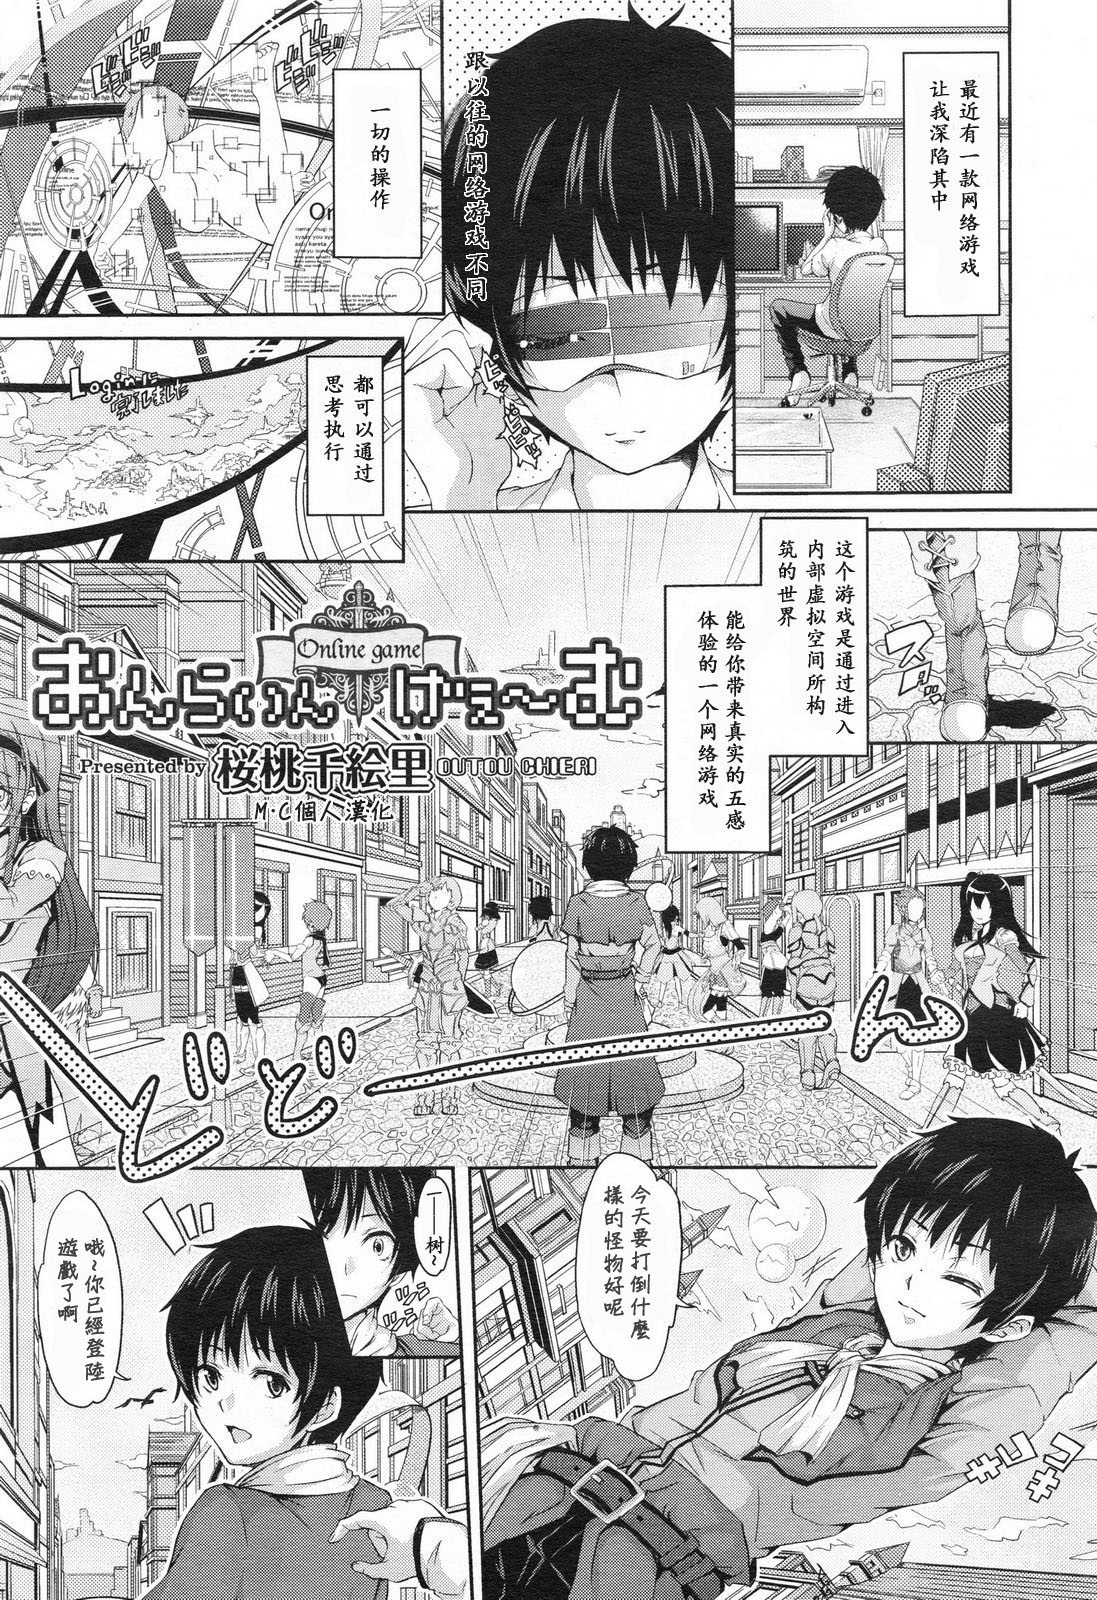 [Outou Chieri] Online Game (COMIC AUN 2013-06) [Chinese] [M·C個人漢化] 0